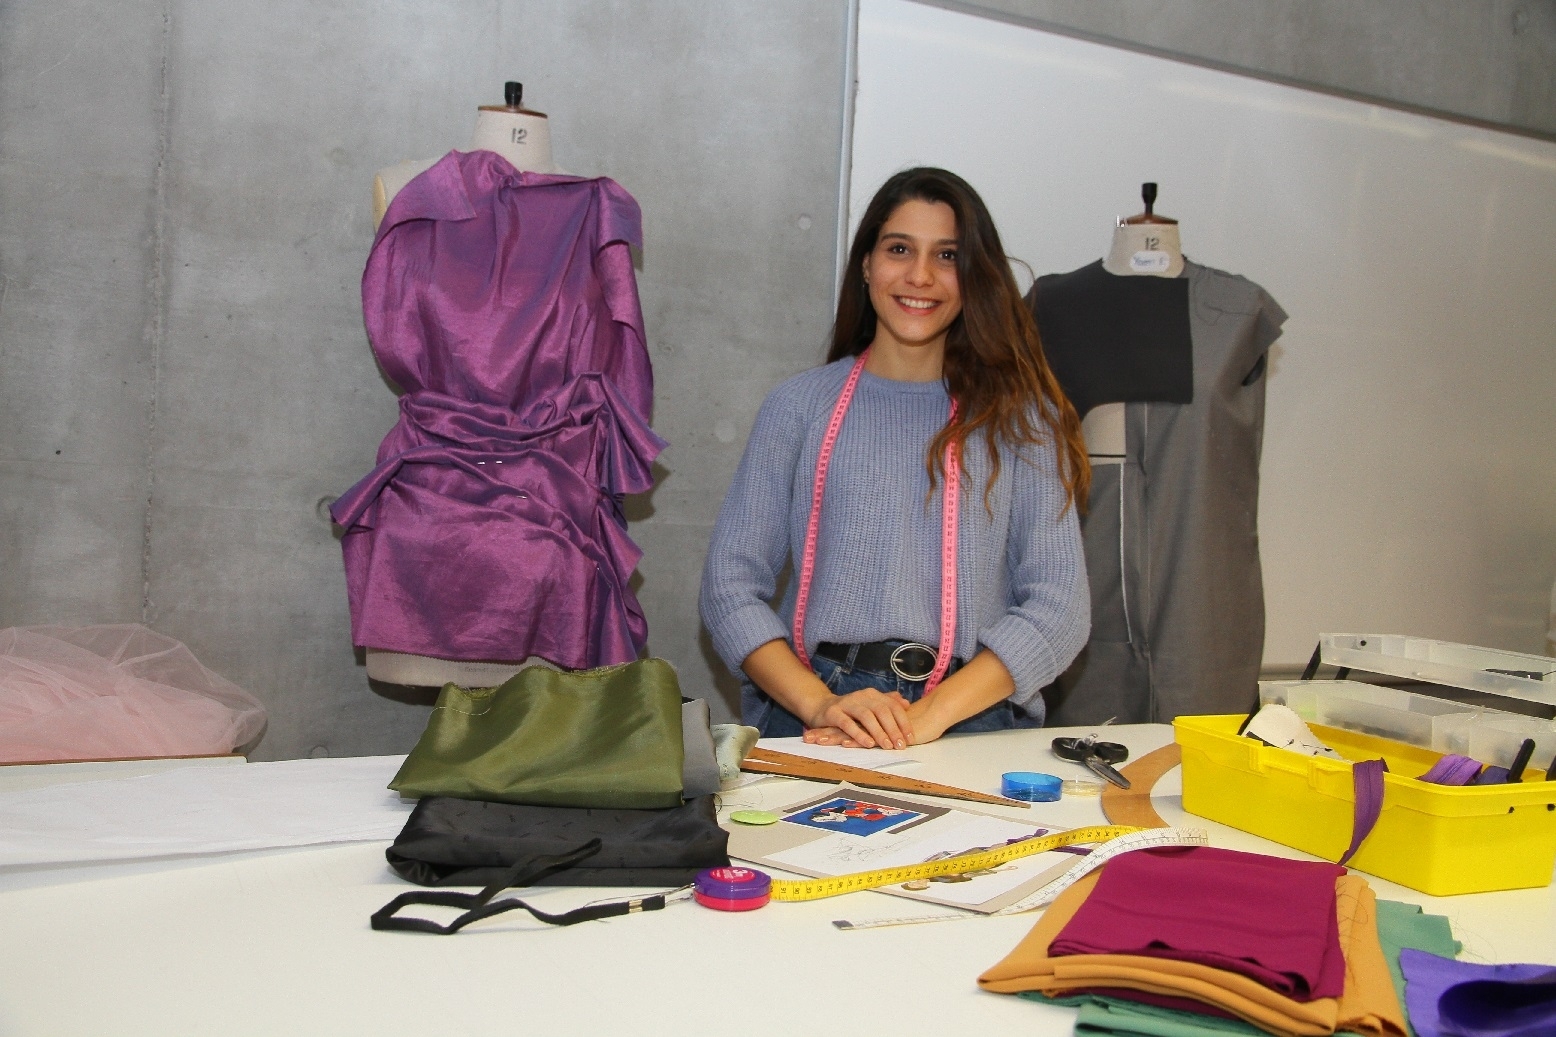 YOUNG FASHION DESIGNER OF IUE CREATED DESIGNS FOR CABIN CREW